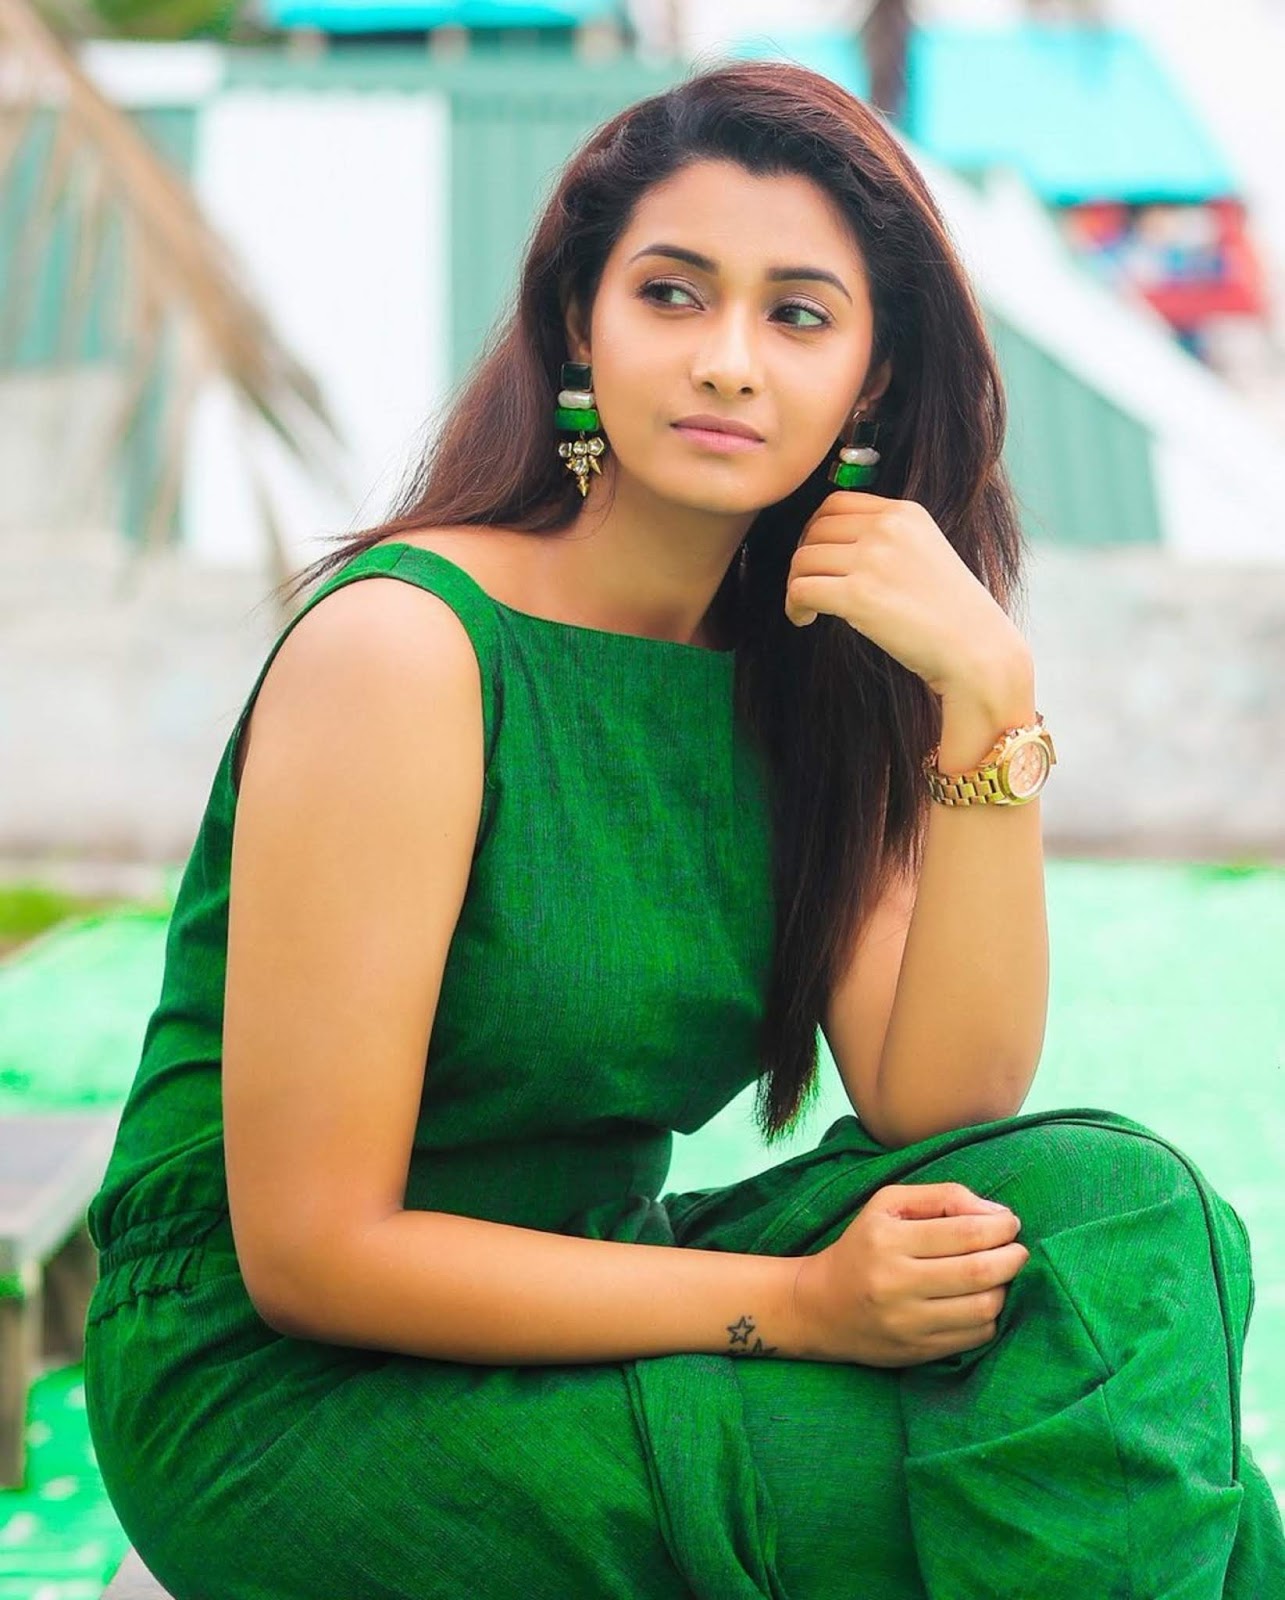 Priya Bhavani Shankar Sex - Priya Bhavani Shankar Cute and Hot Photos-Beautiful HD Pictures